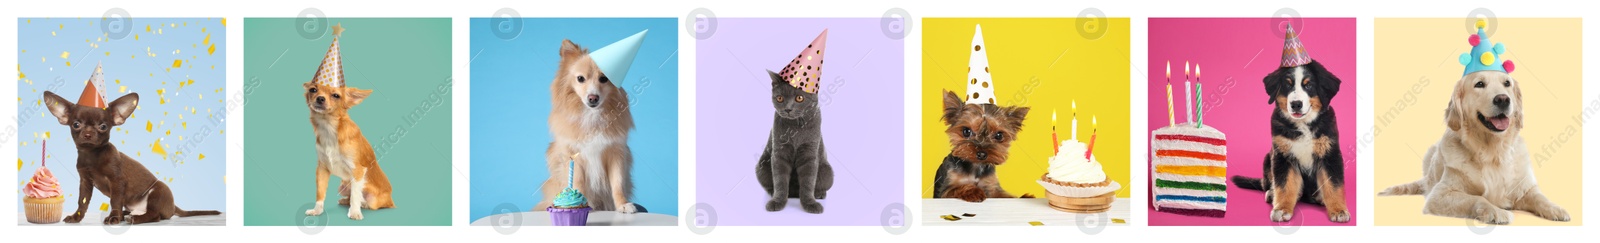 Image of Adorable birthday cat and dogs in party hats on different color backgrounds, collage of portraits